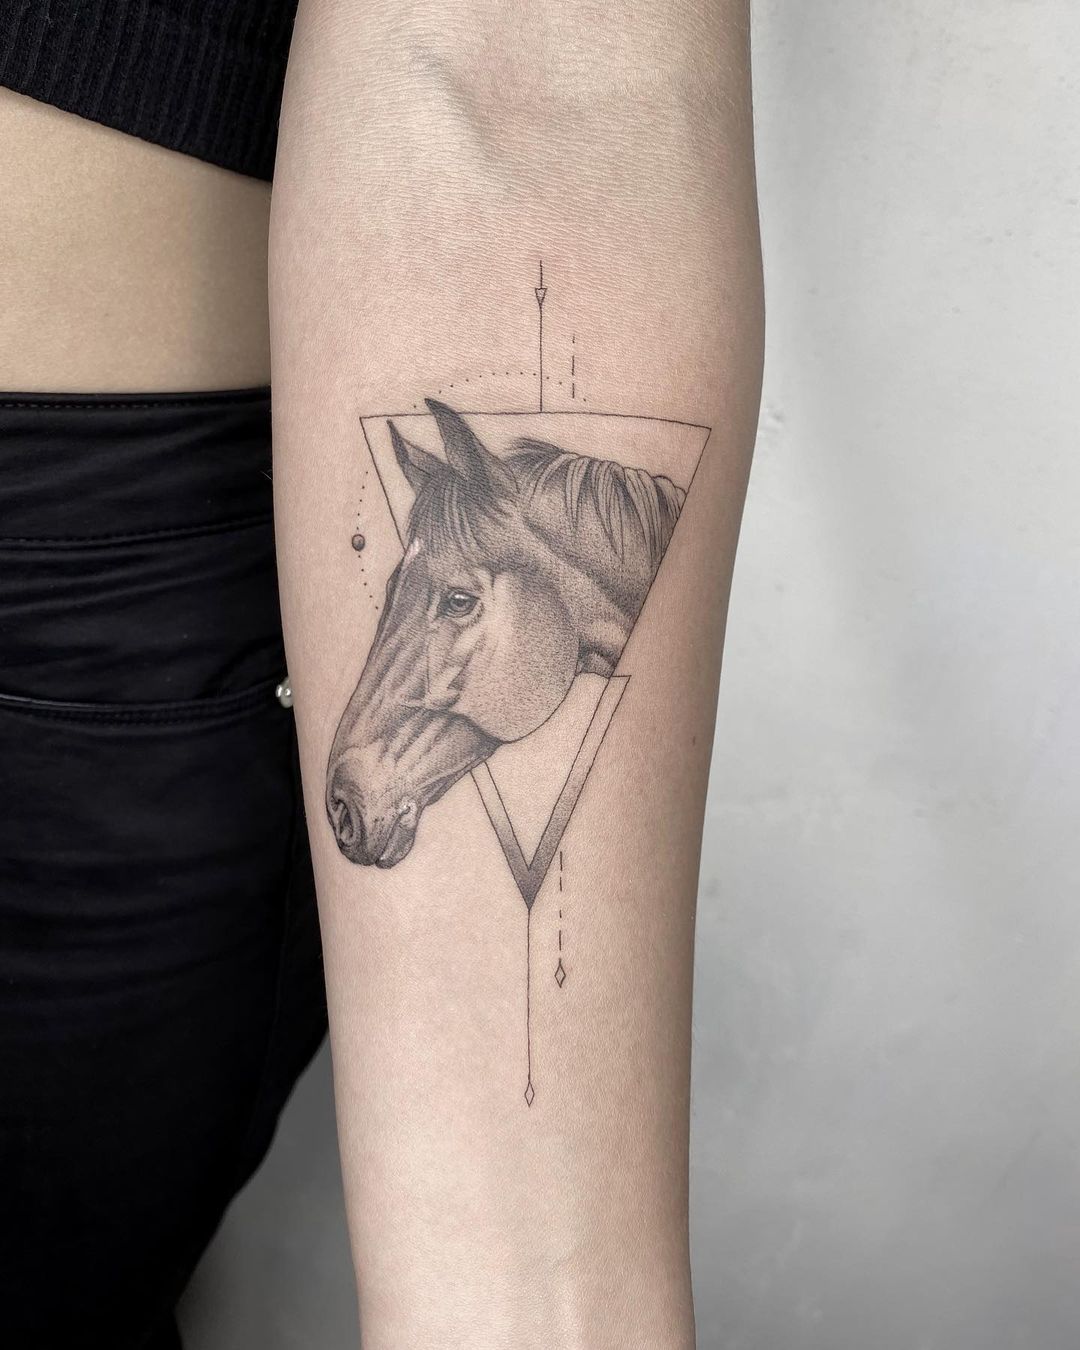 Minimalistic bunny and horse tattoo done in fine line.